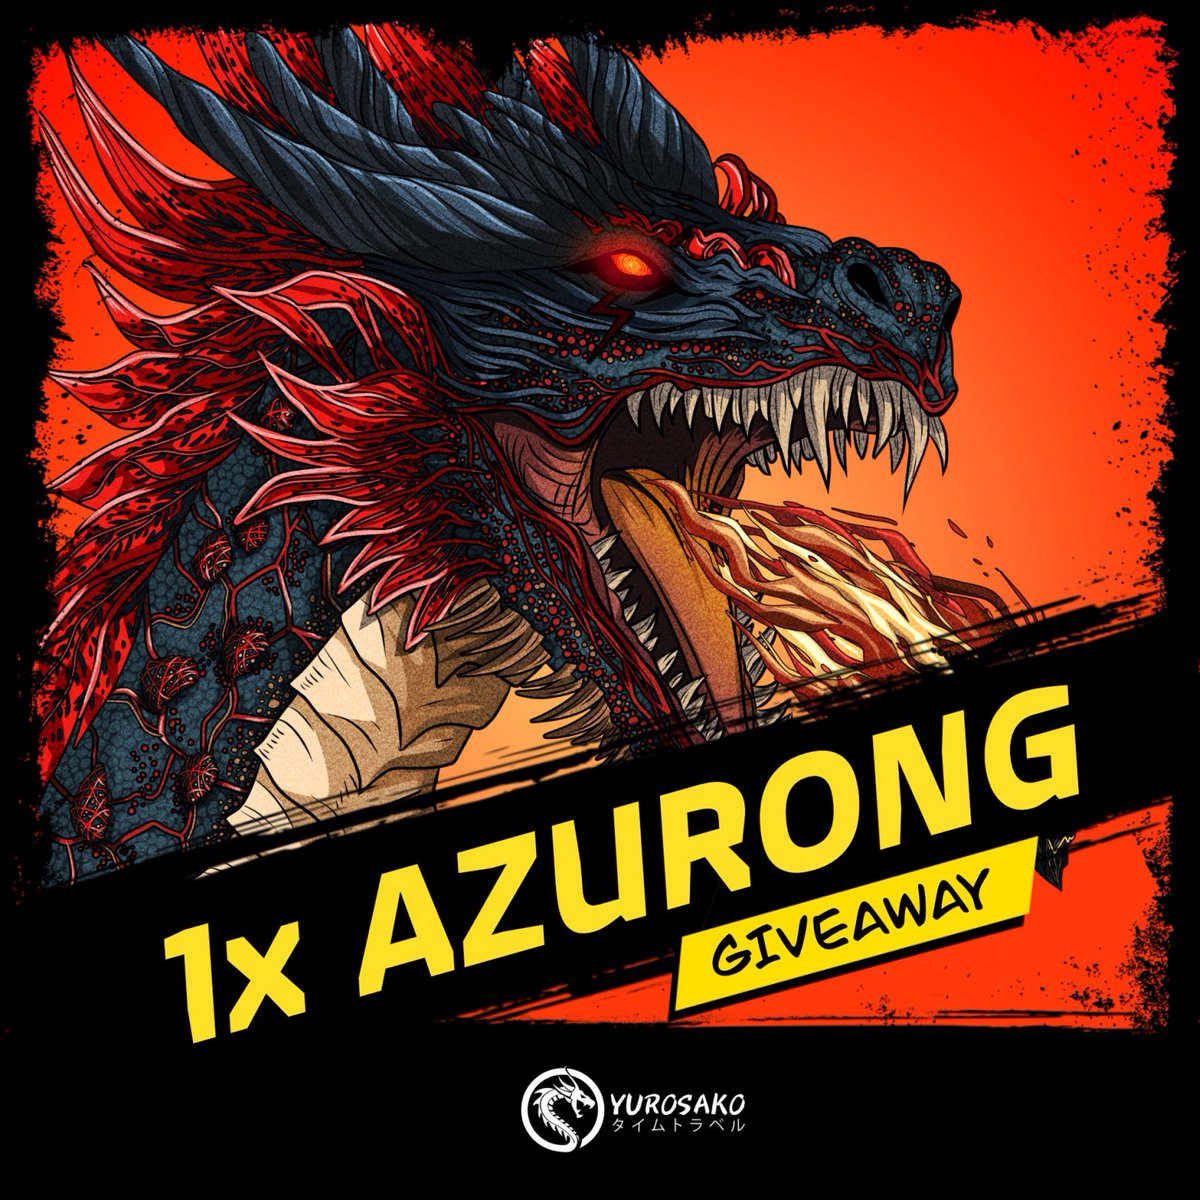 🎁 AZURONG #GIVEAWAY Prizes: 🏆 1x AZURONG NFT (Coming soon) To Win:👇 1⃣ Follow @yurosako 2⃣ Tag 4 Friends 3⃣ Like & Retweet 📆Drop date: TBA 🐉2,700 1/1 NFTs Ends in: 72 hours ⏰ #Giveaways #NFTGiveaways #Anime #NFT #NFTs #Ethereum #ETH